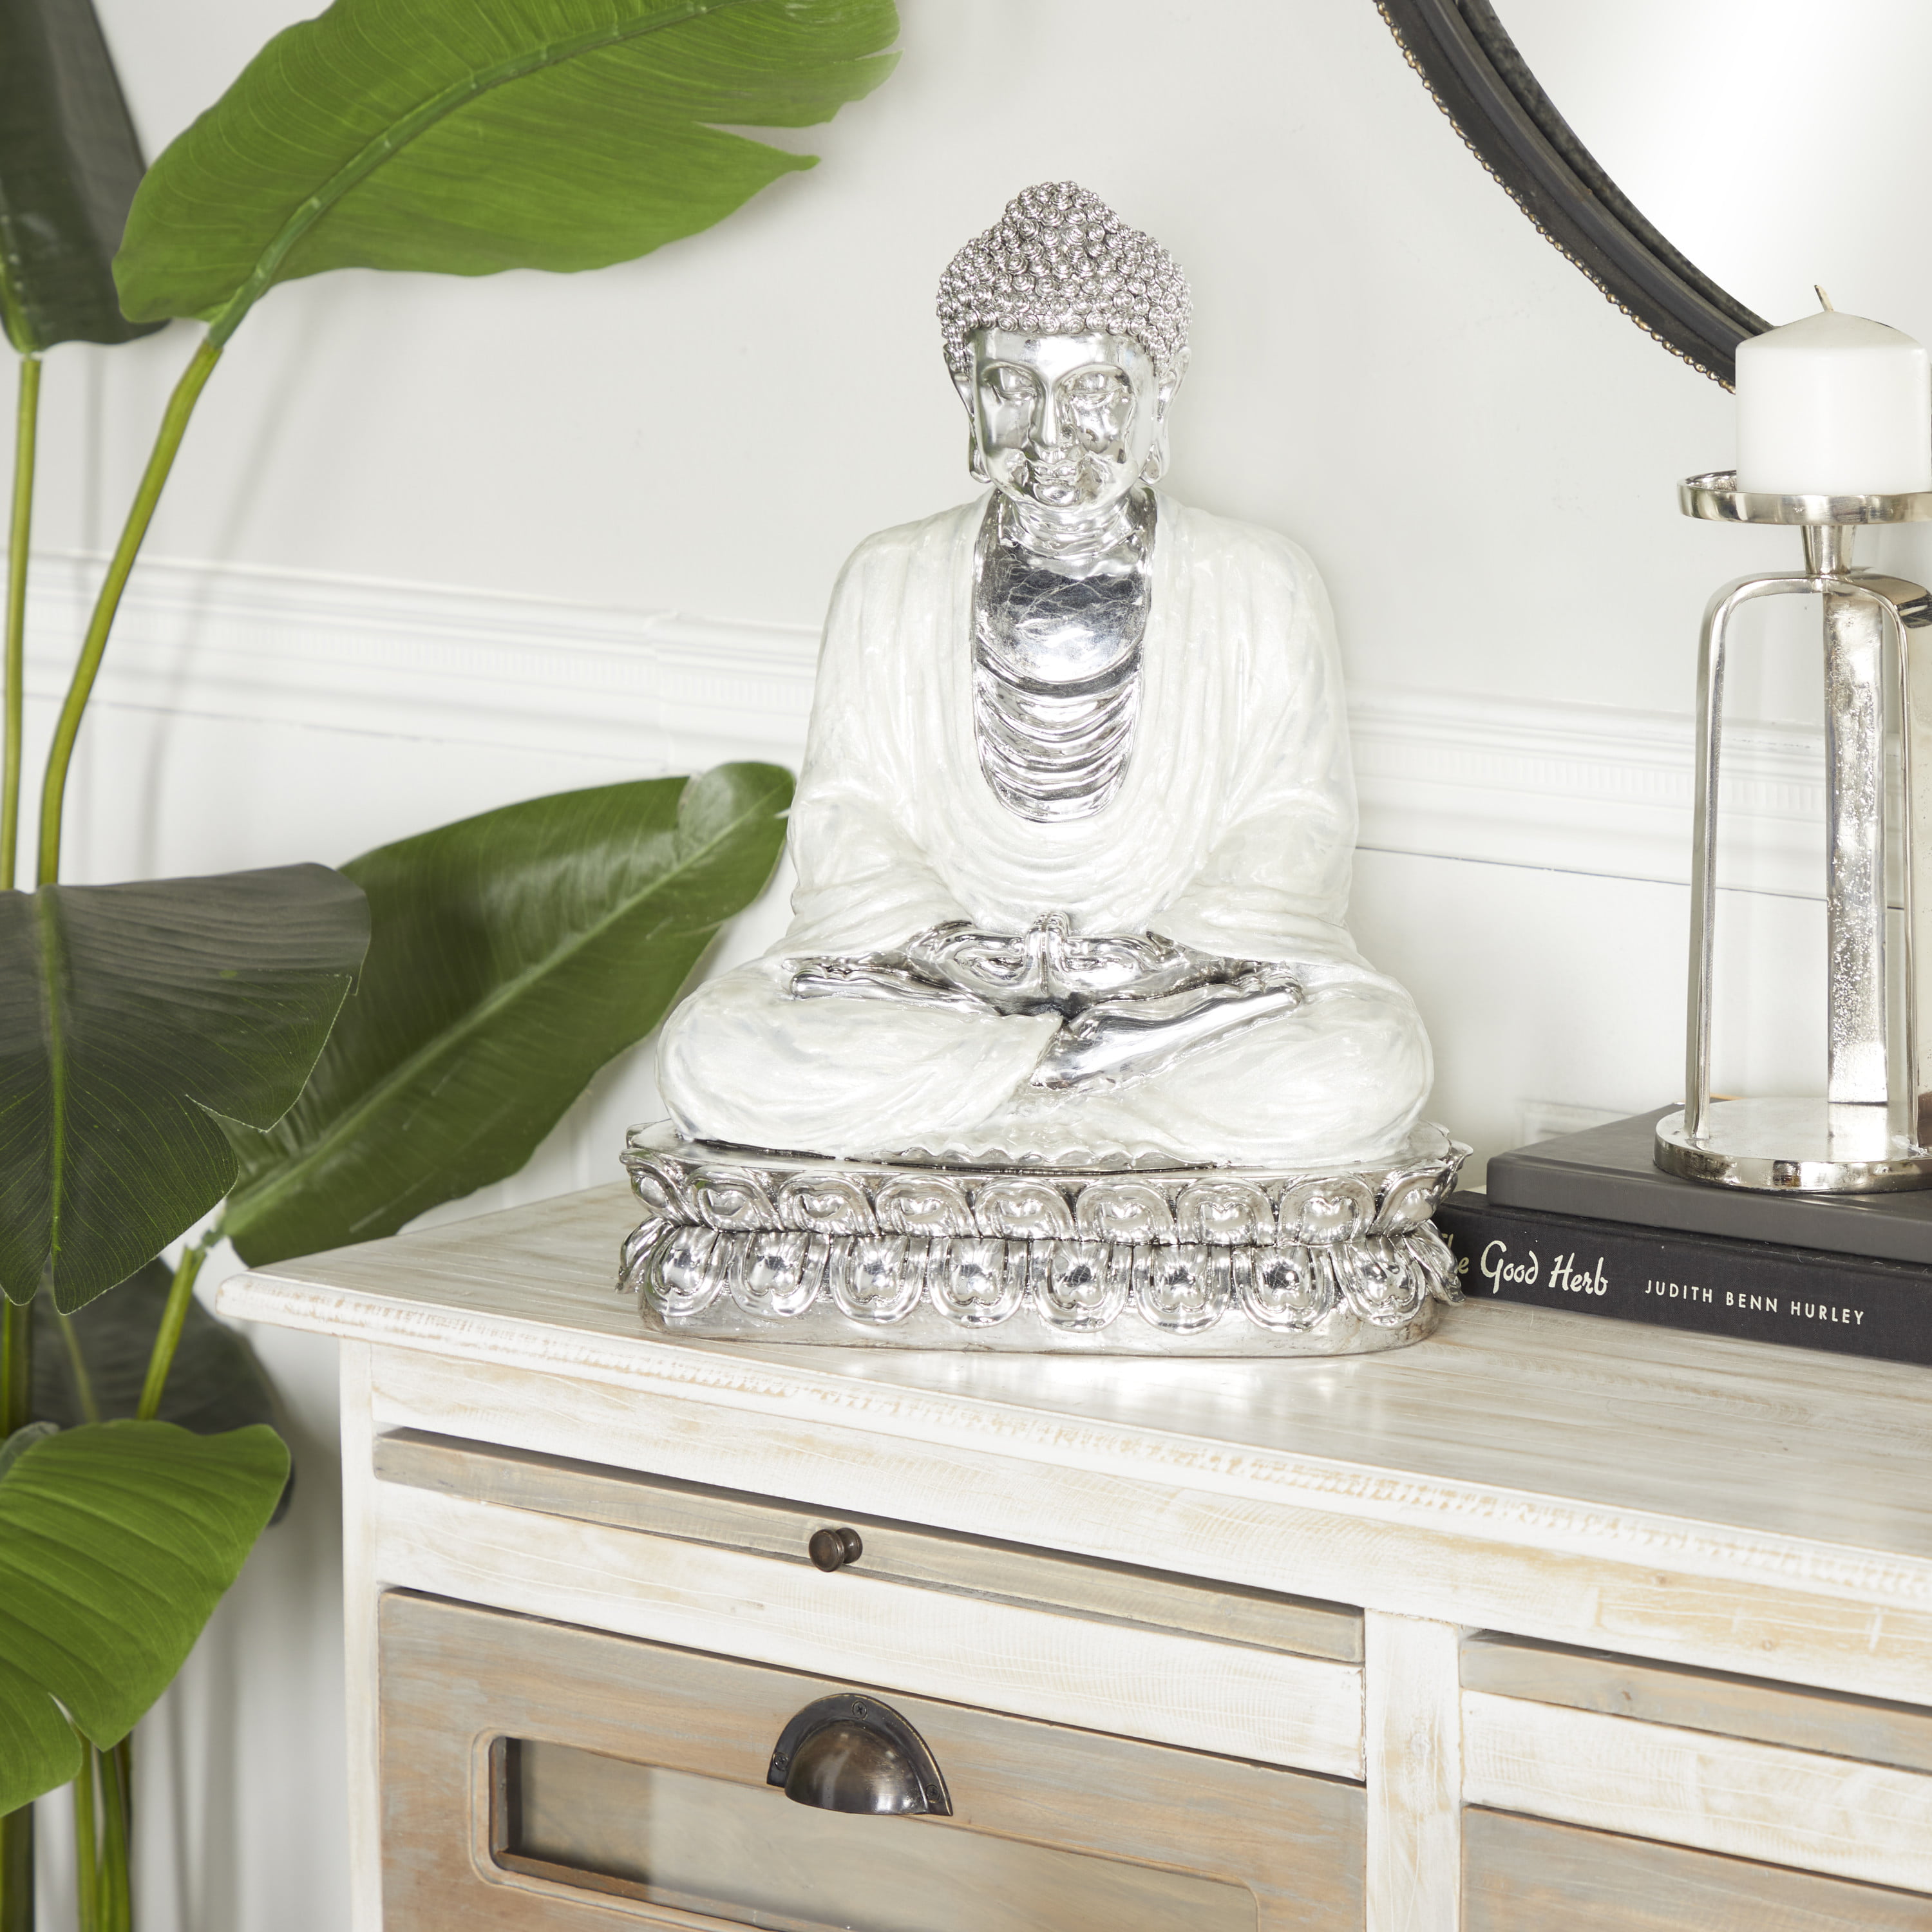 Oom of meneer Overlappen Laptop 12" x 16" Silver Polystone Meditating Buddha Sculpture with Engraved  Carvings and Relief Detailing, by DecMode - Walmart.com